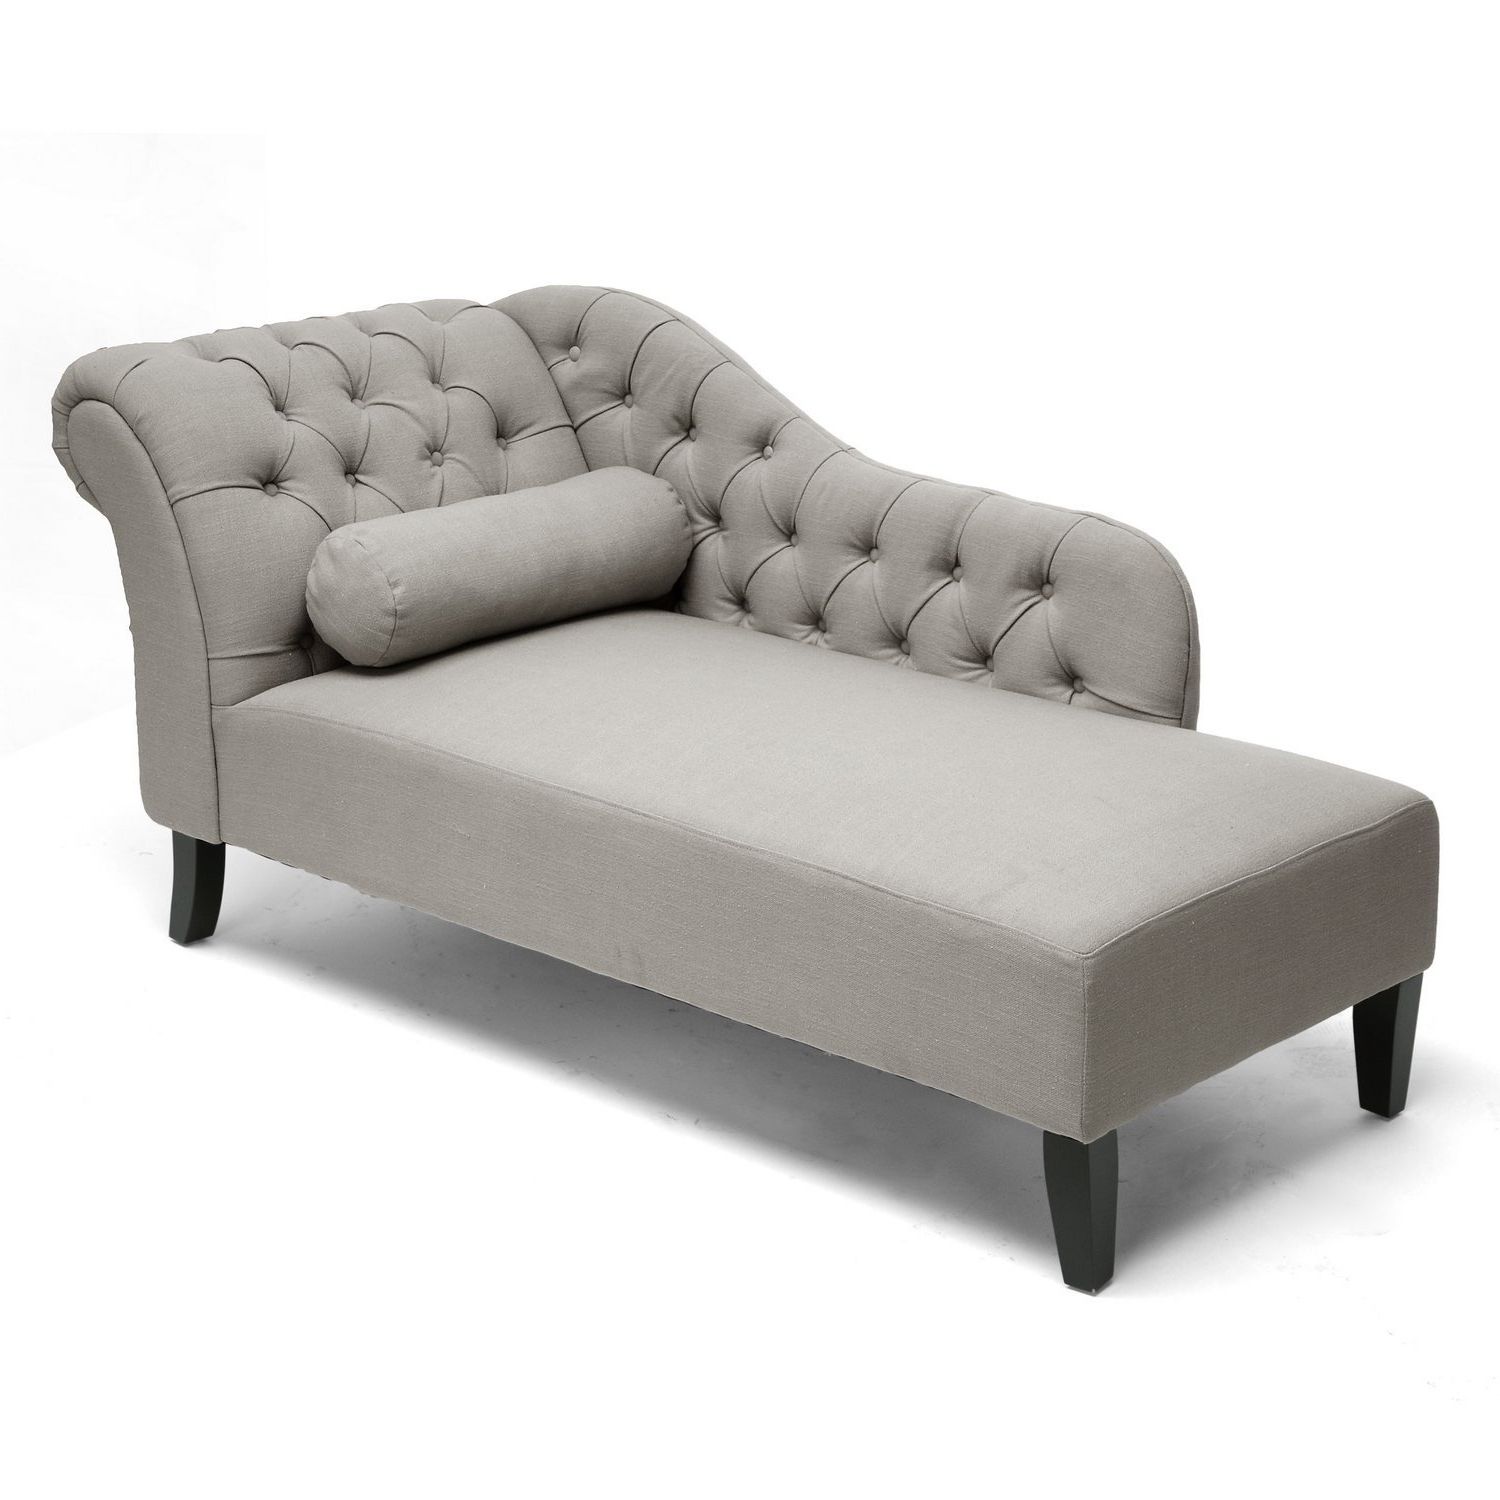 Best And Newest Chaise Lounges With Arms Inside Amazon: Baxton Studio Aphrodite Tufted Putty Linen Modern (View 2 of 15)